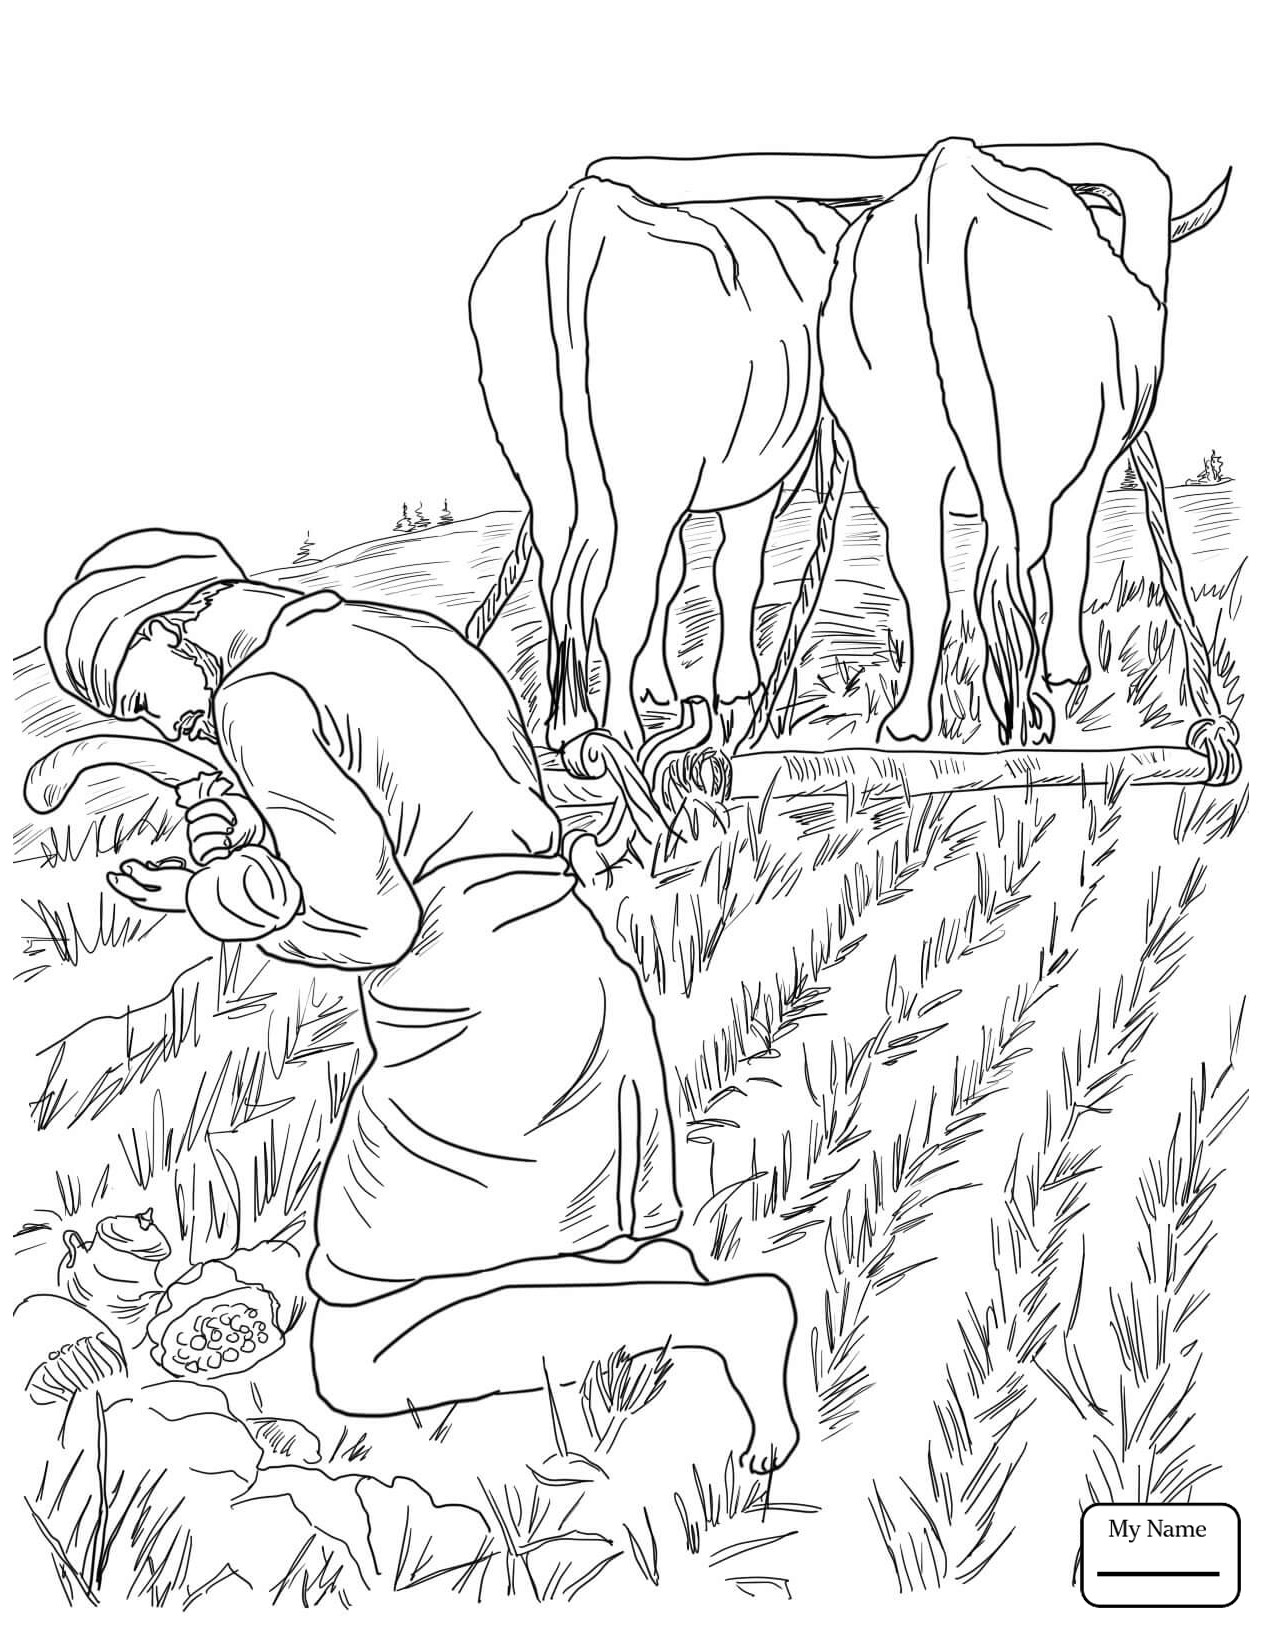 Parable Of The Sower Coloring Sheet Coloring Pages